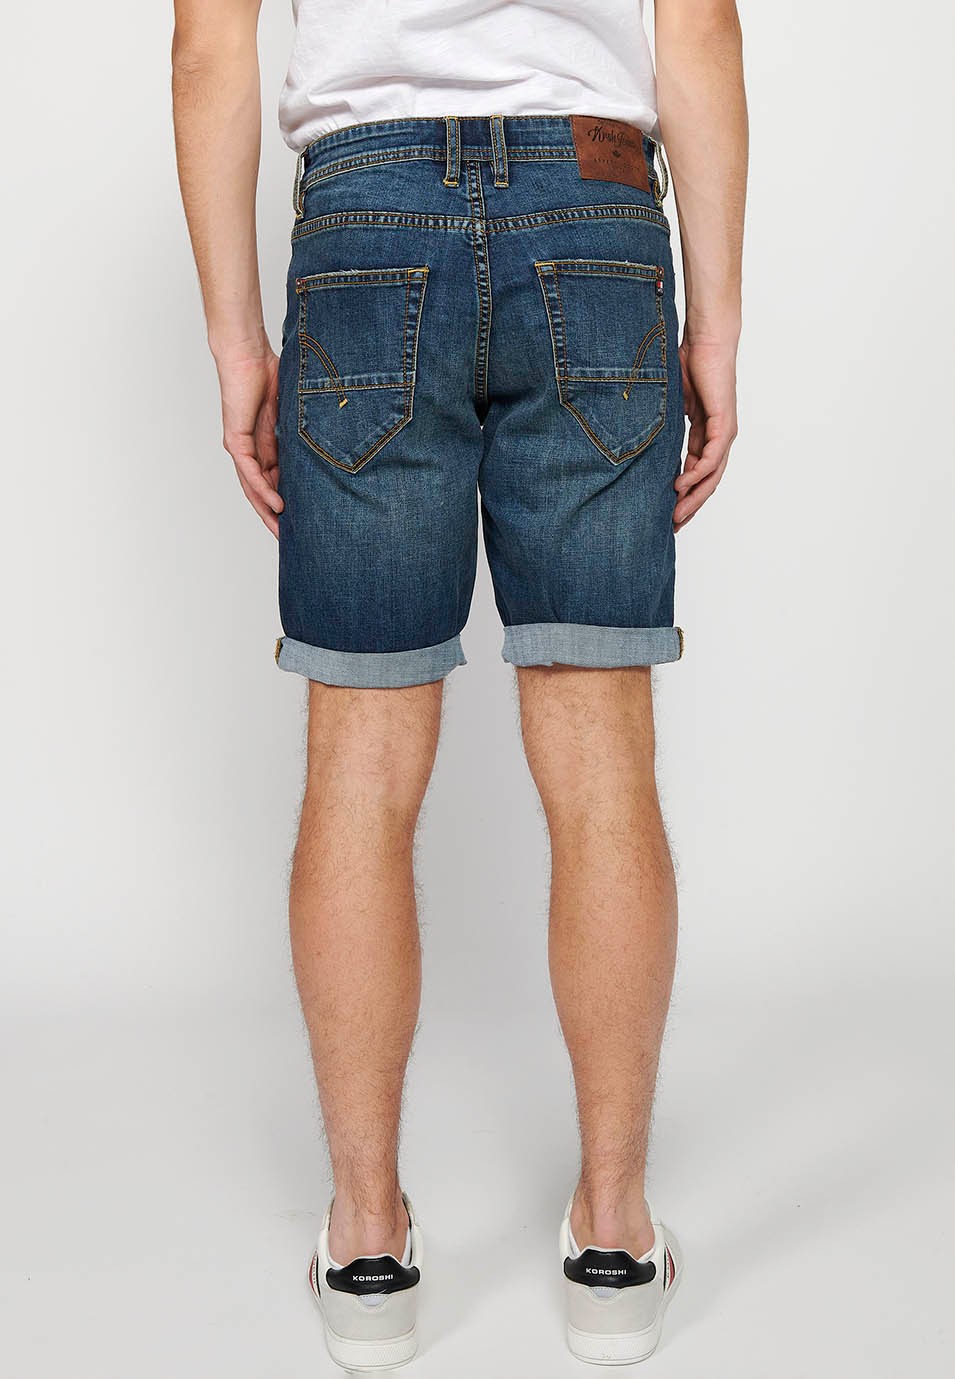 Bermuda denim shorts with front zipper and button closure with five pockets, one blue pocket pocket for Men 2